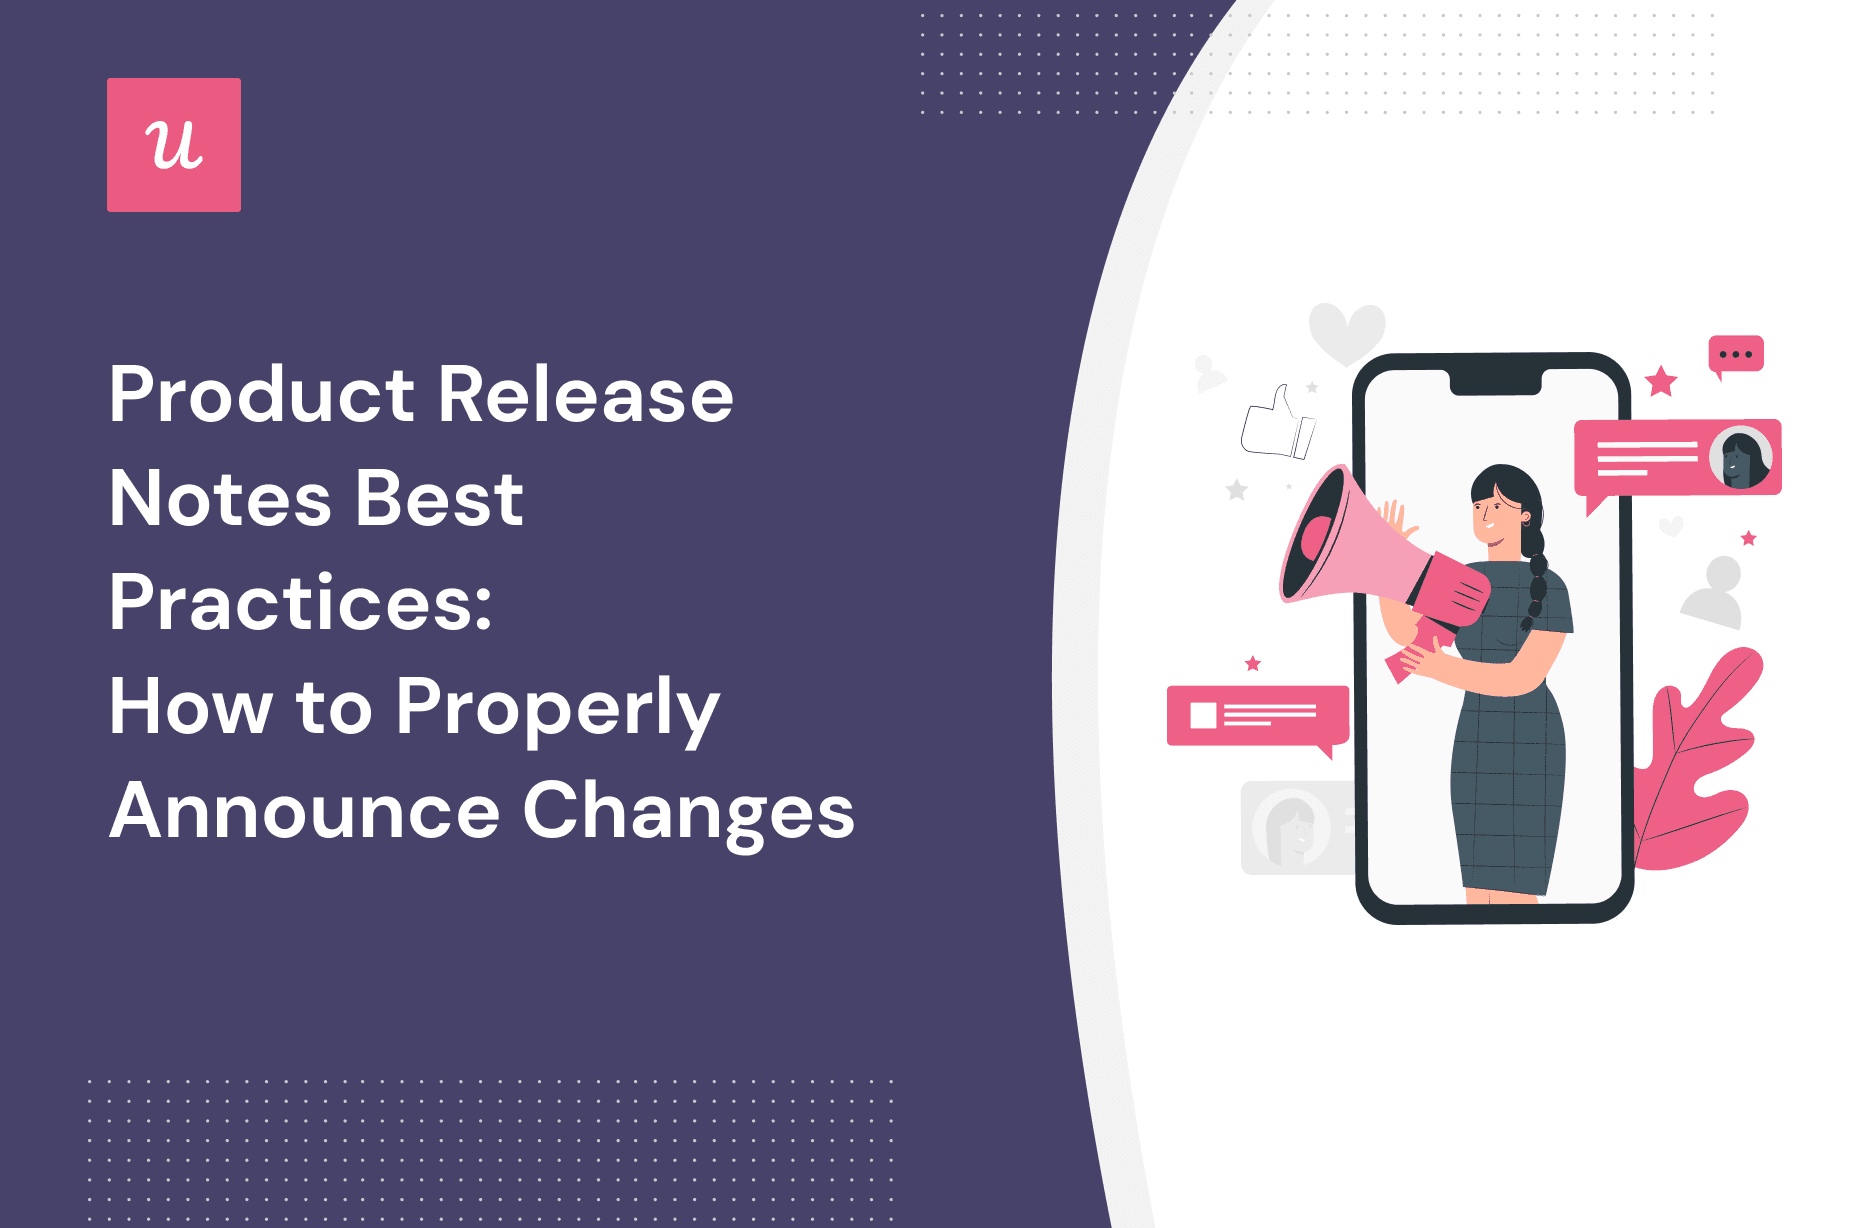 Product Release Notes Best Practices: How to Properly Announce Changes cover